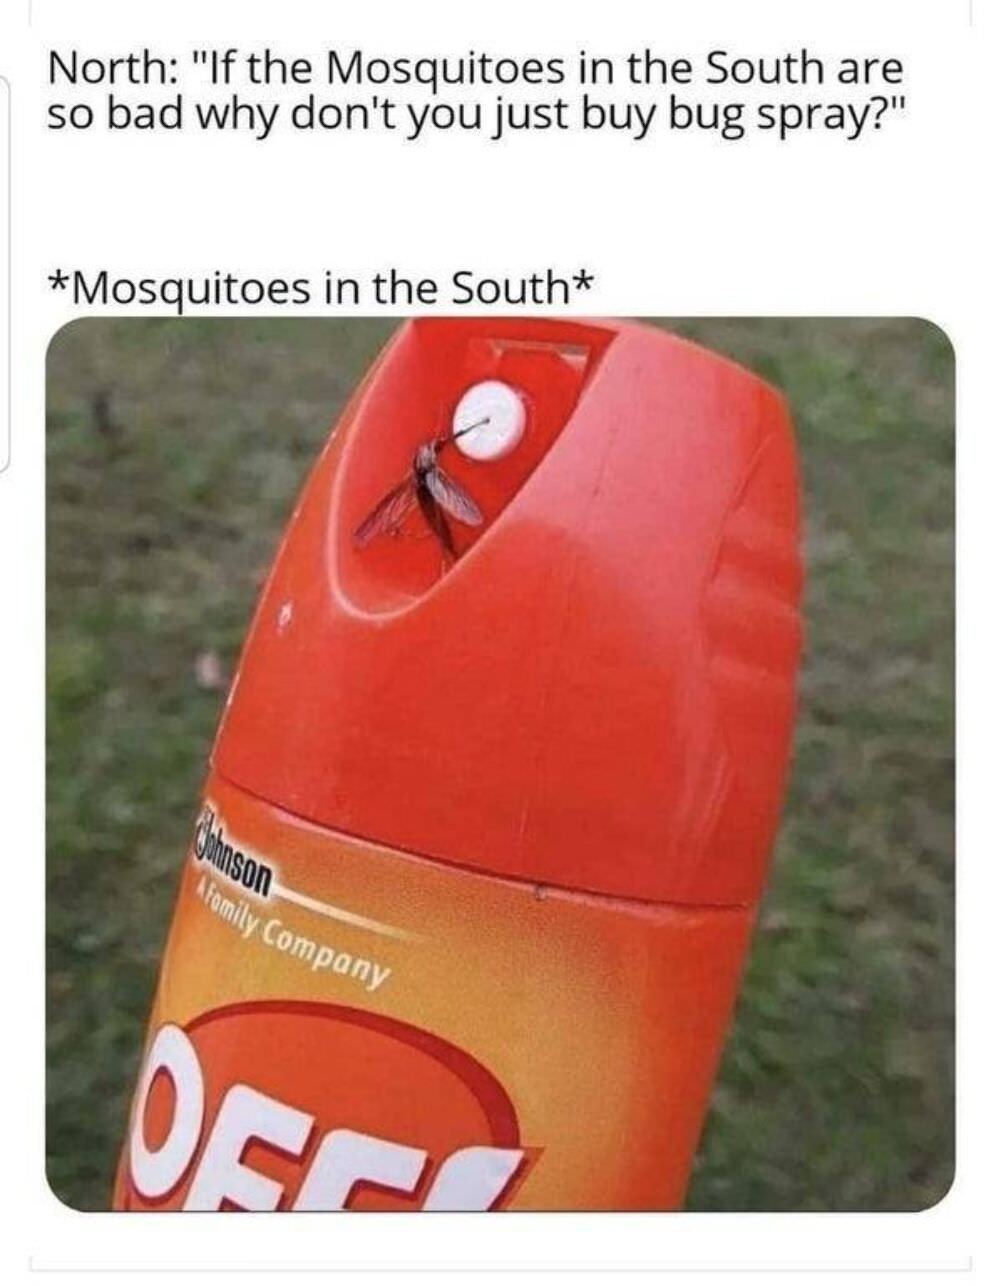 mosquitos in the south